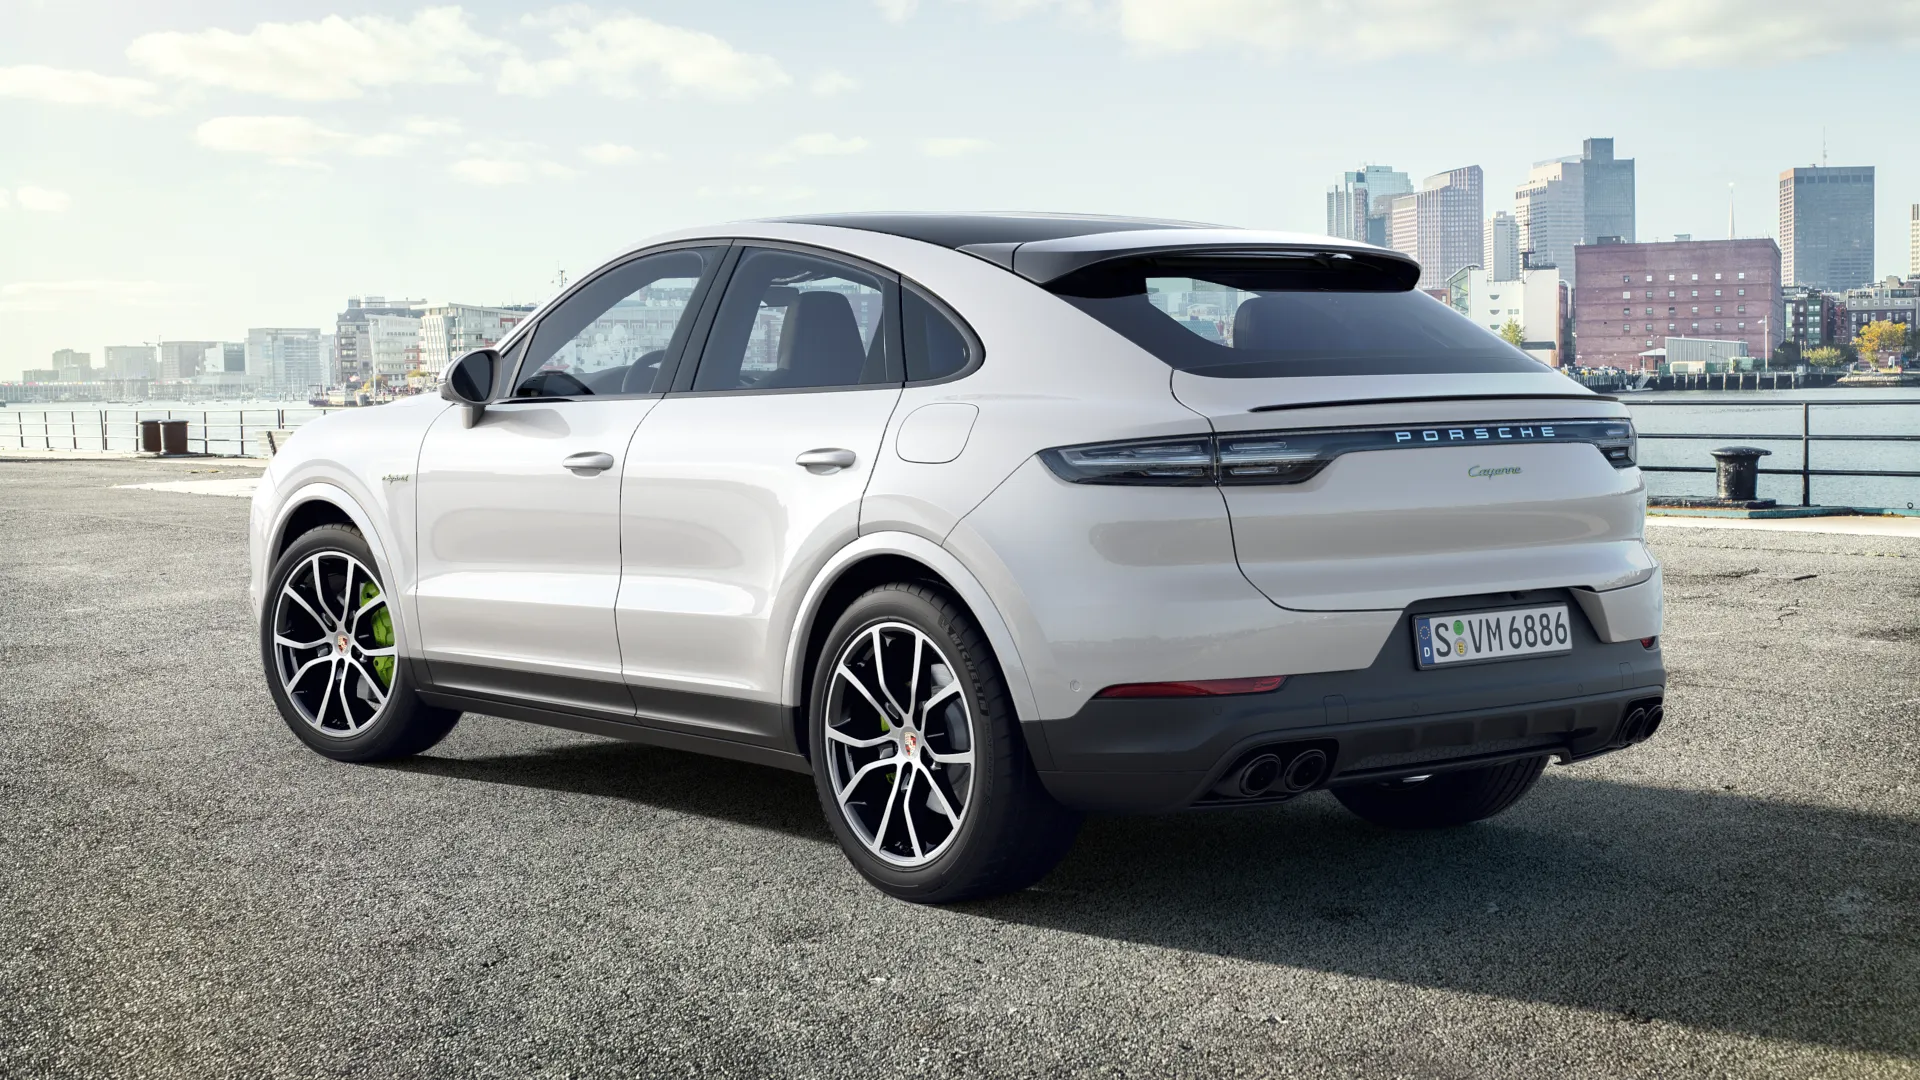 Exterior view of Cayenne E-Hybrid Coupe